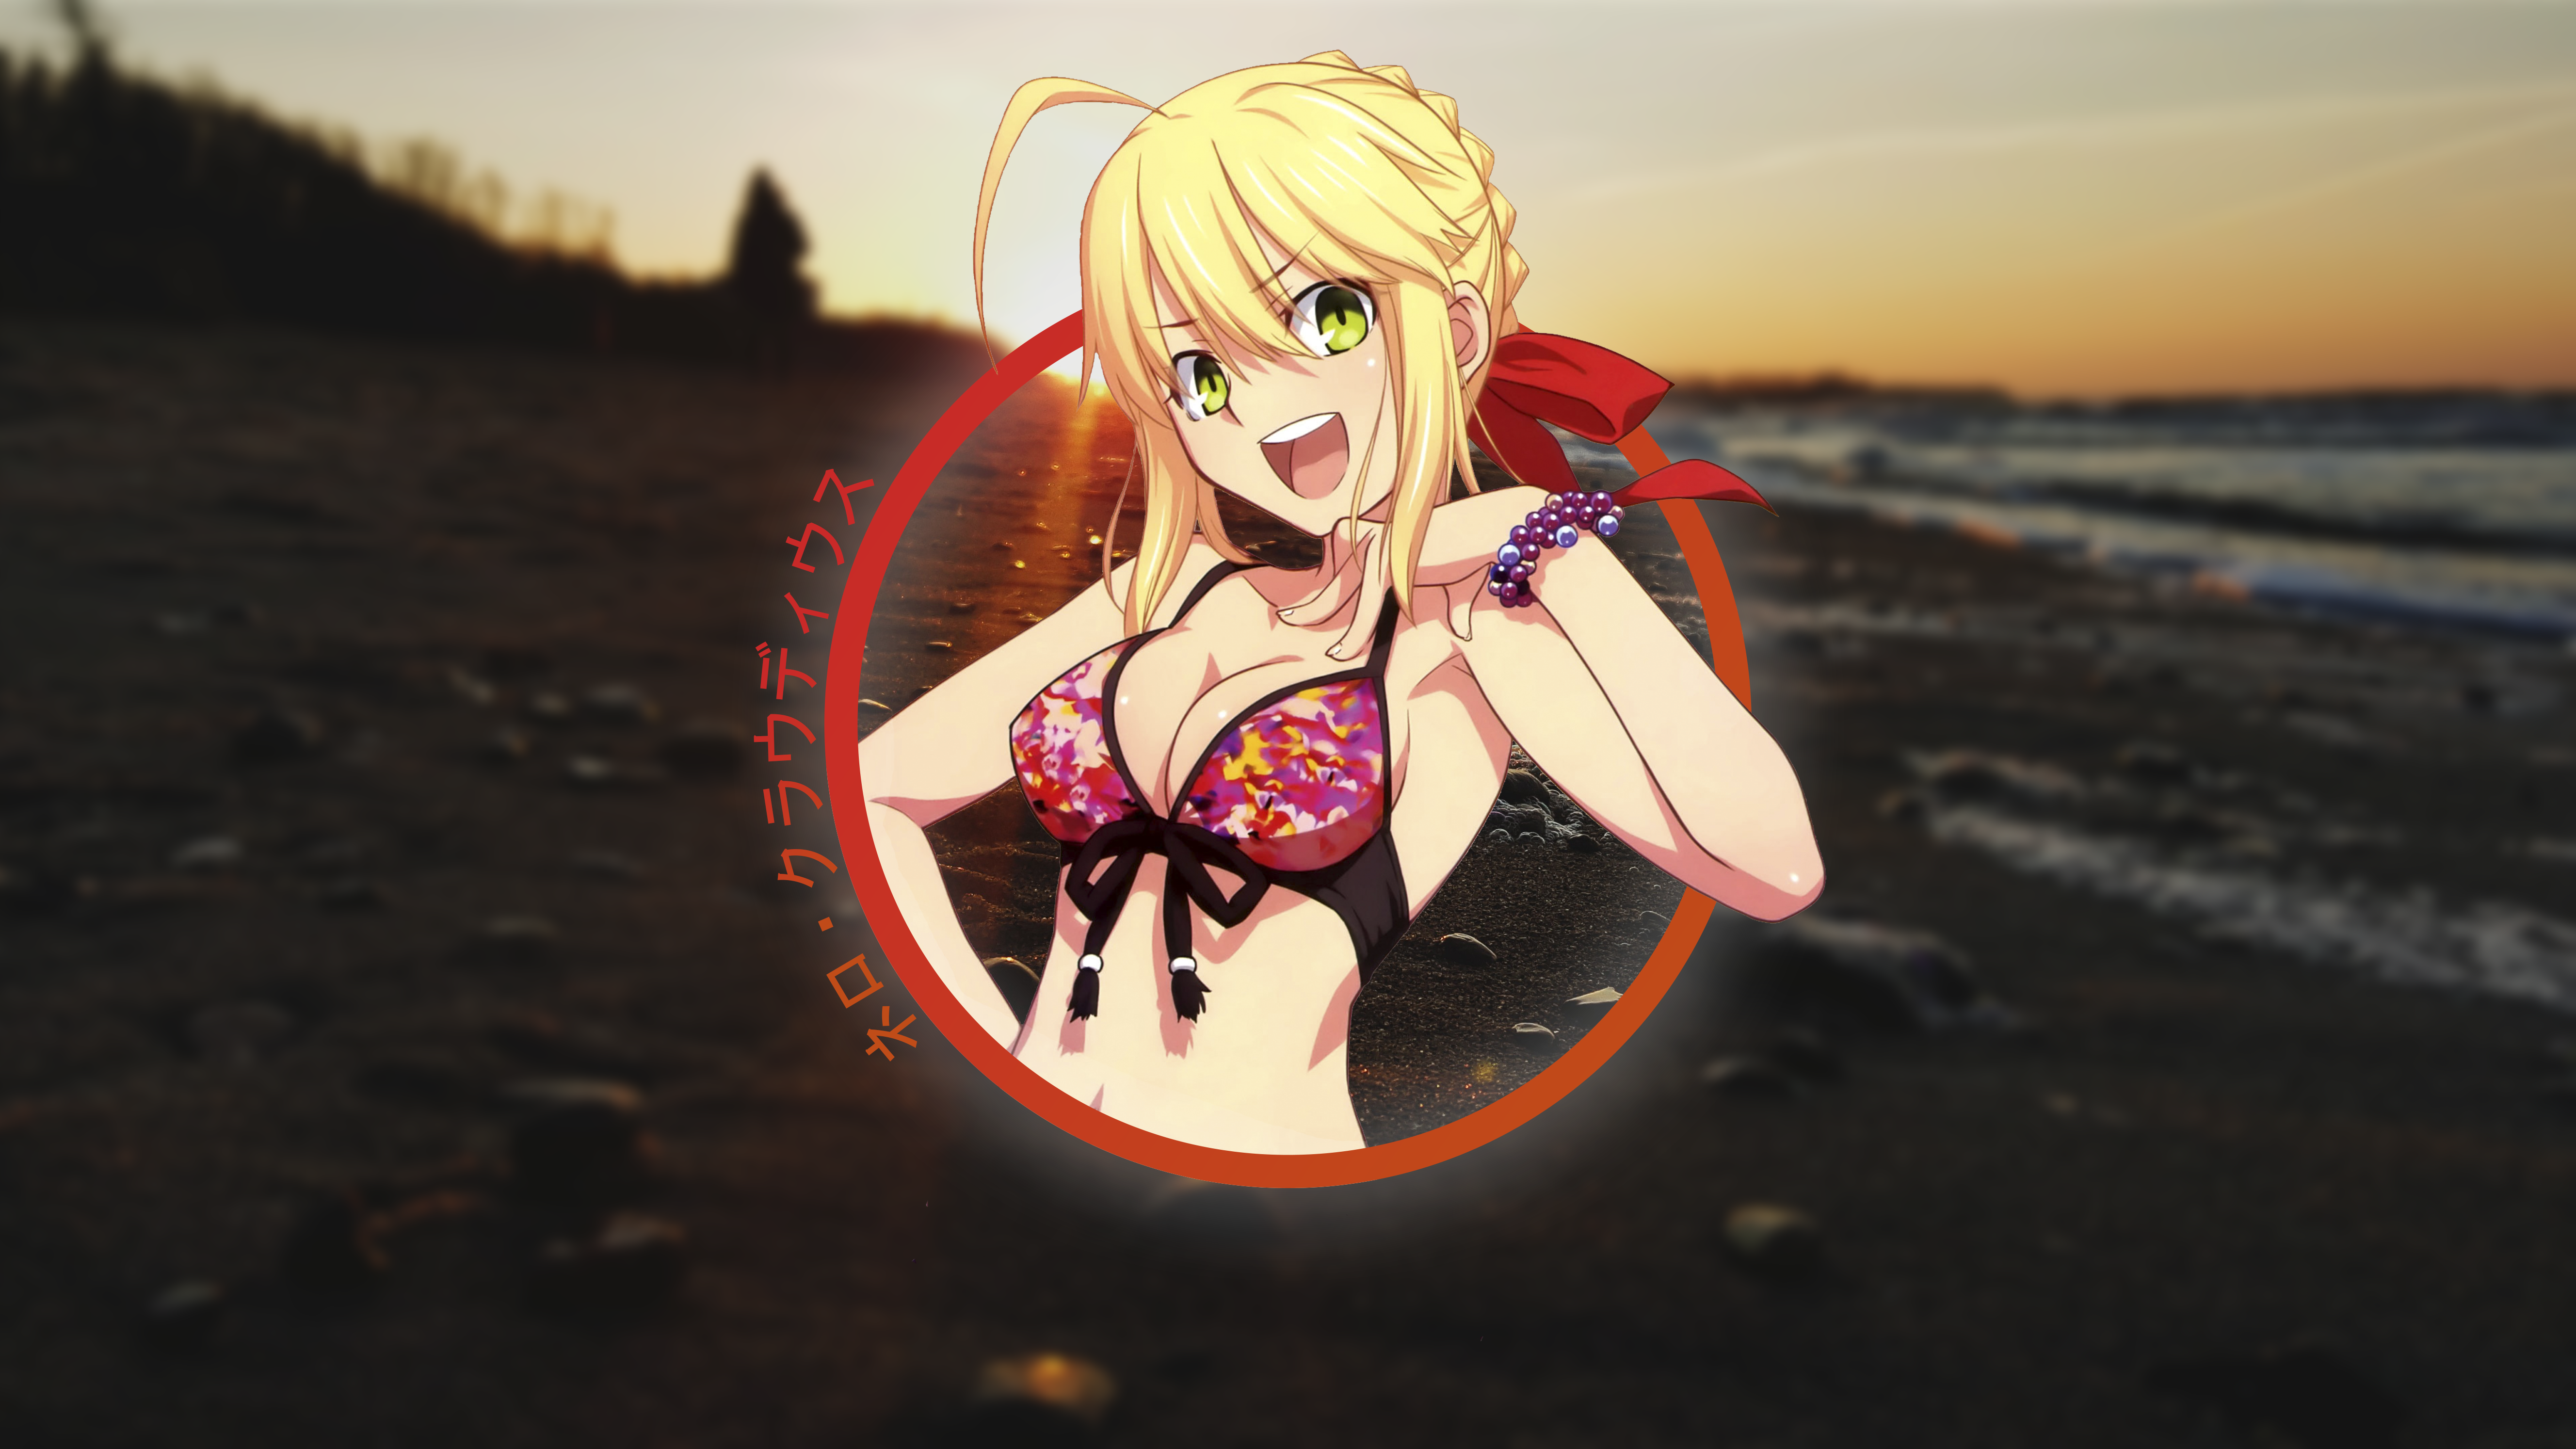 Anime 5312x2988 anime girls render in shapes picture-in-picture Fate/Extra bikini cleavage Nero Claudius Fate series blonde